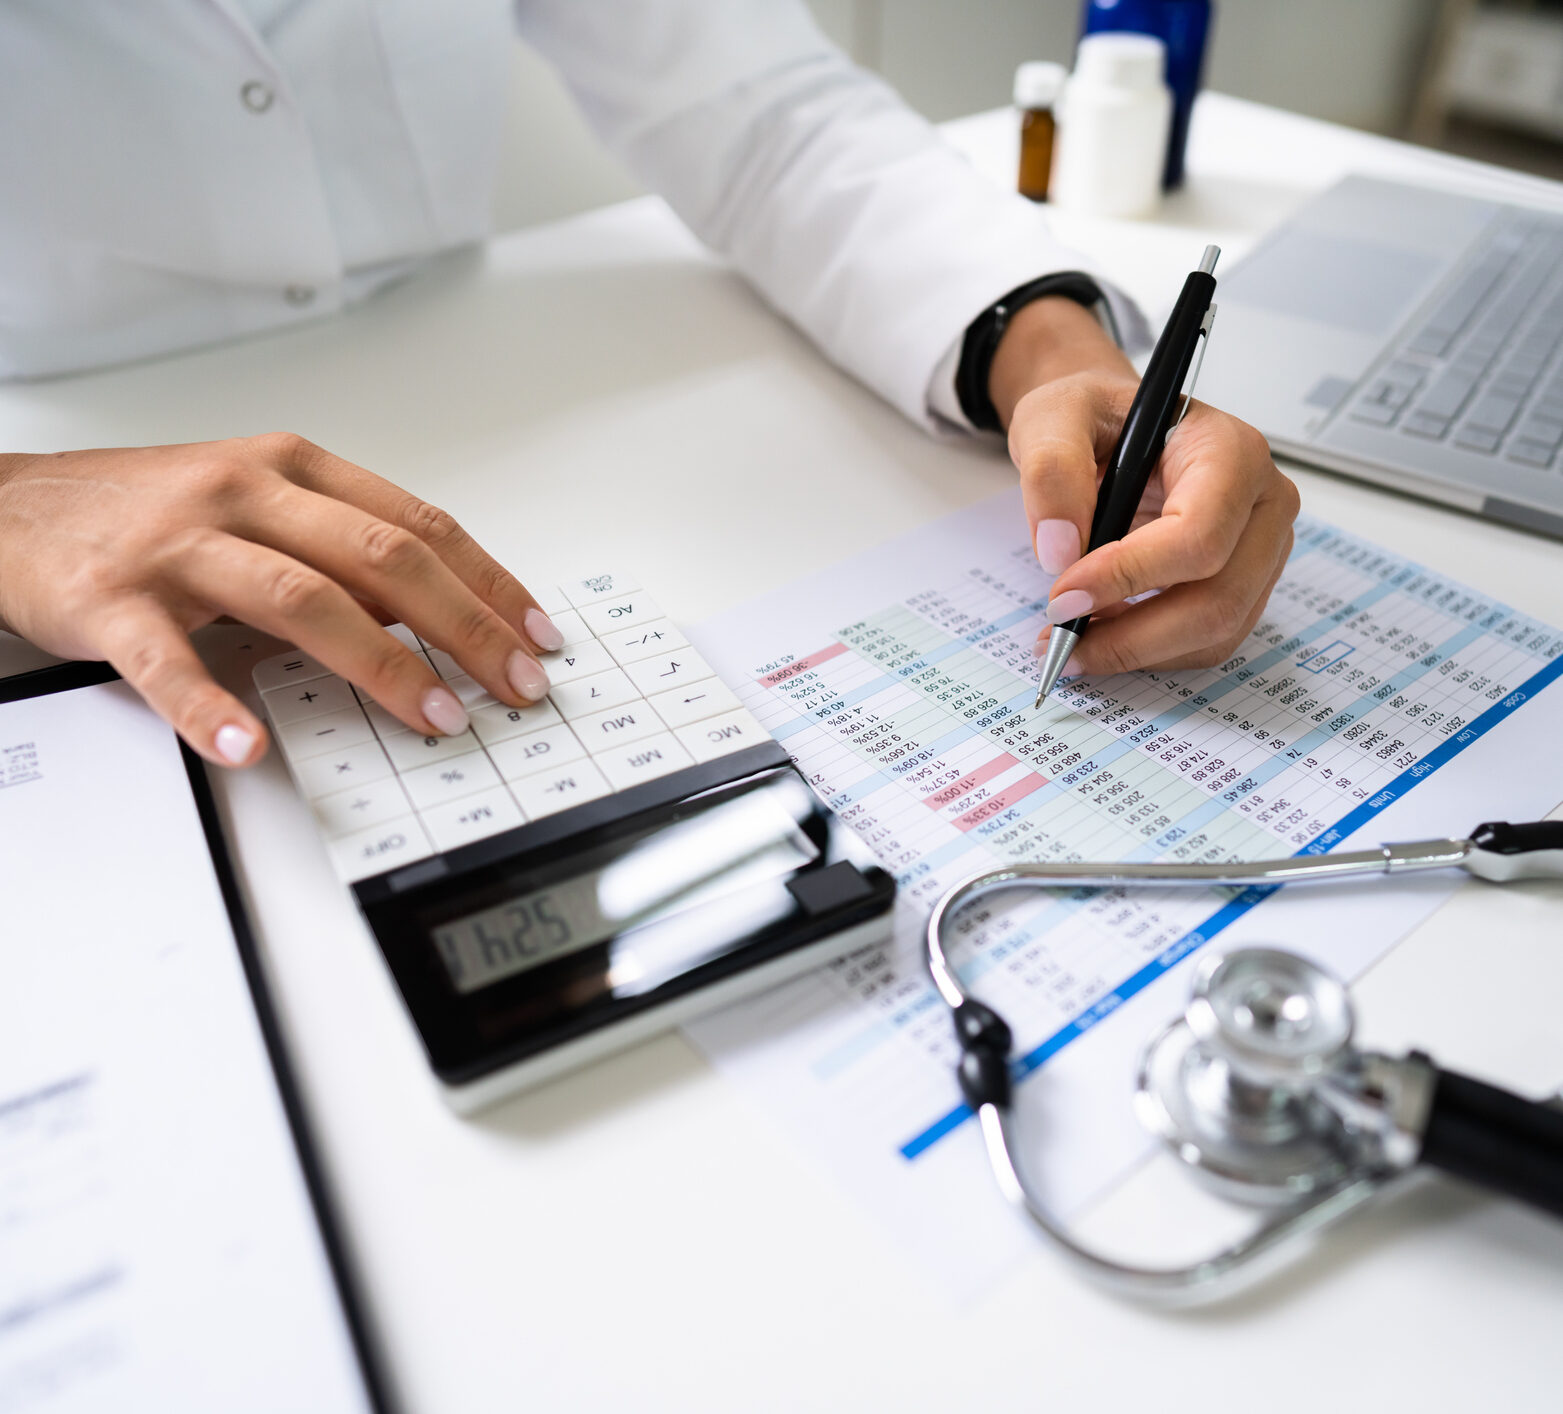 Medical Bill Codes Audit And Billing In Hospital, CGM billing codes